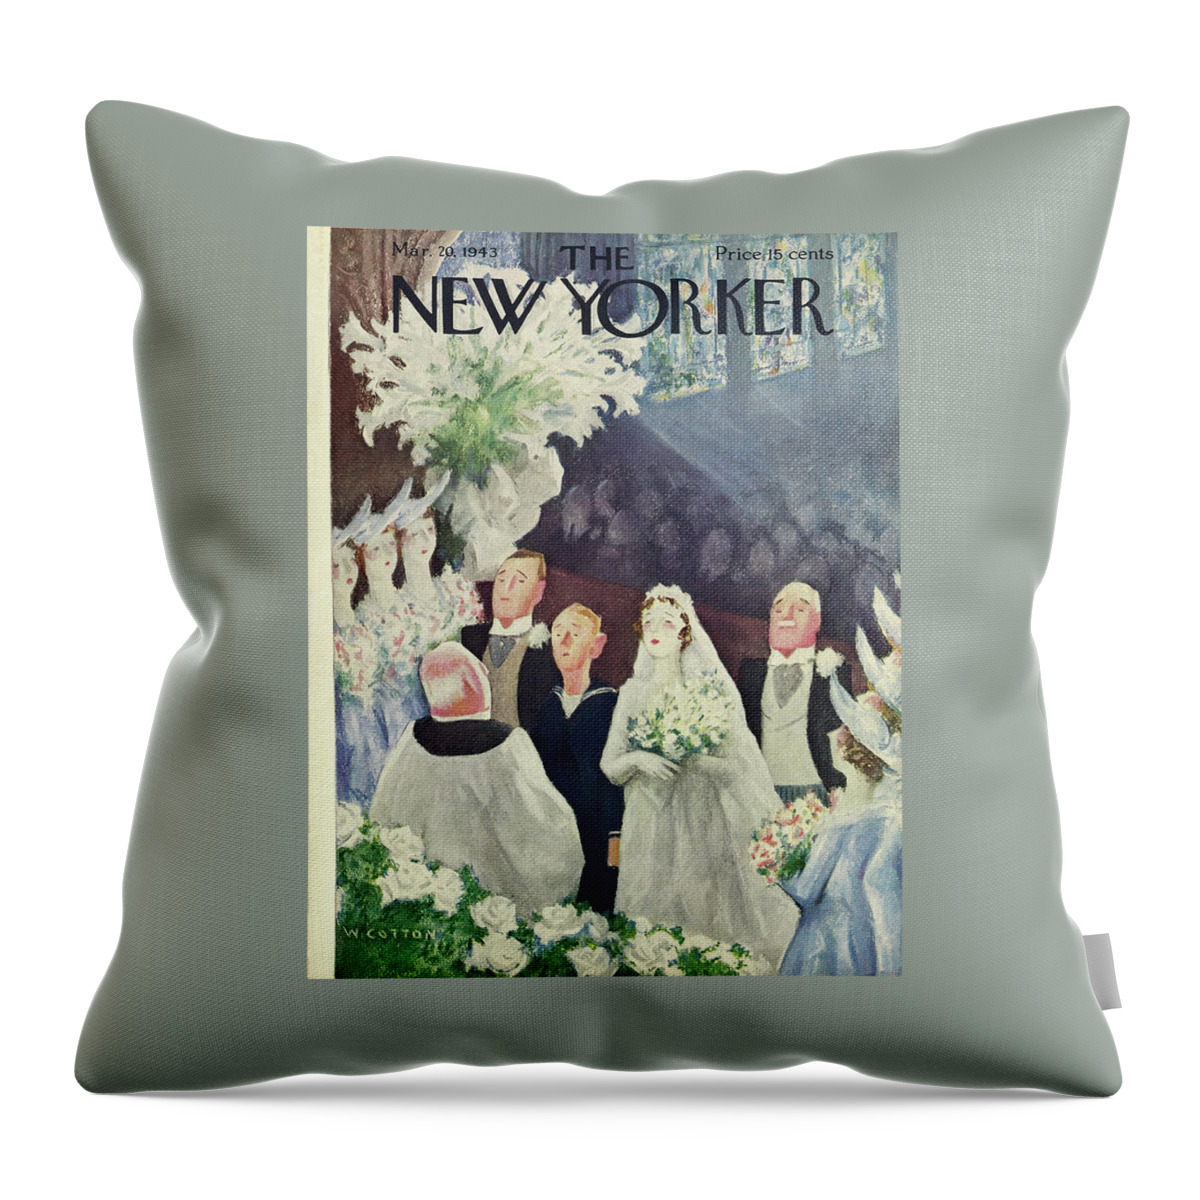 New Yorker March 20 1943 Throw Pillow